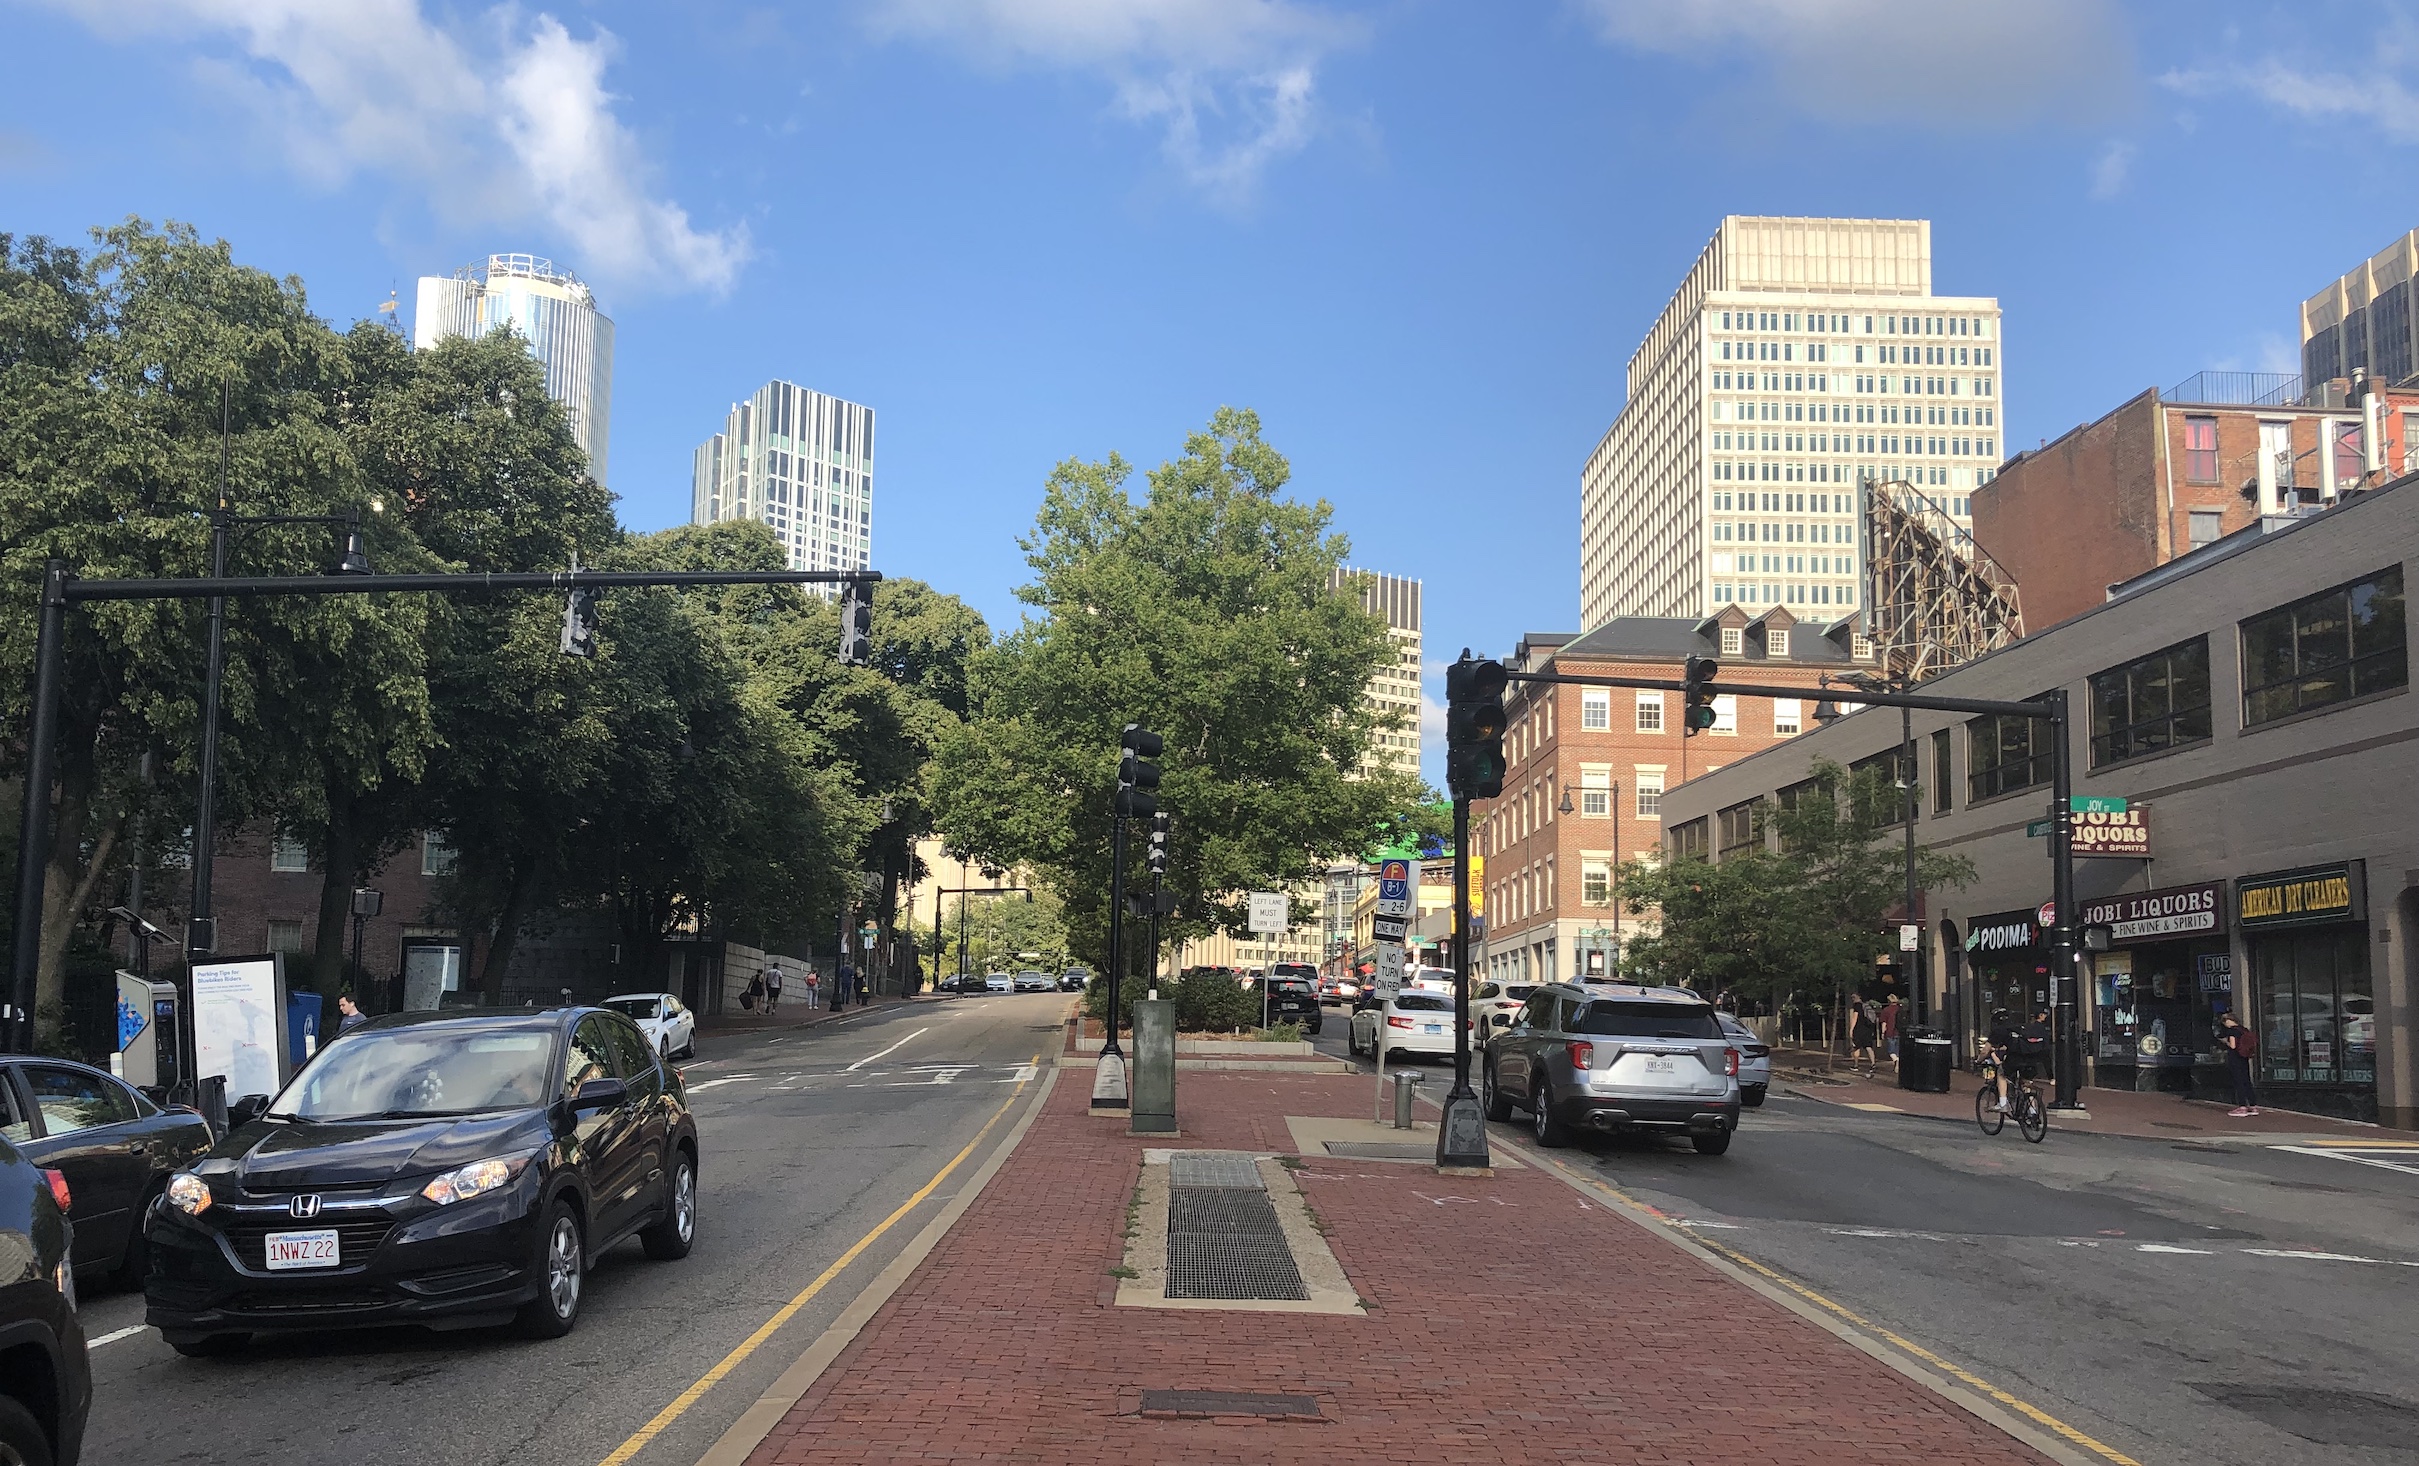 Looking east up Cambridge Street towards Government Center near the intersection of Joy Street. A wide brick-paved median dominates the foreground view; to the sides are two lanes of car traffic in each direction. A bike rider climbs the hill on the right edge of the photo.